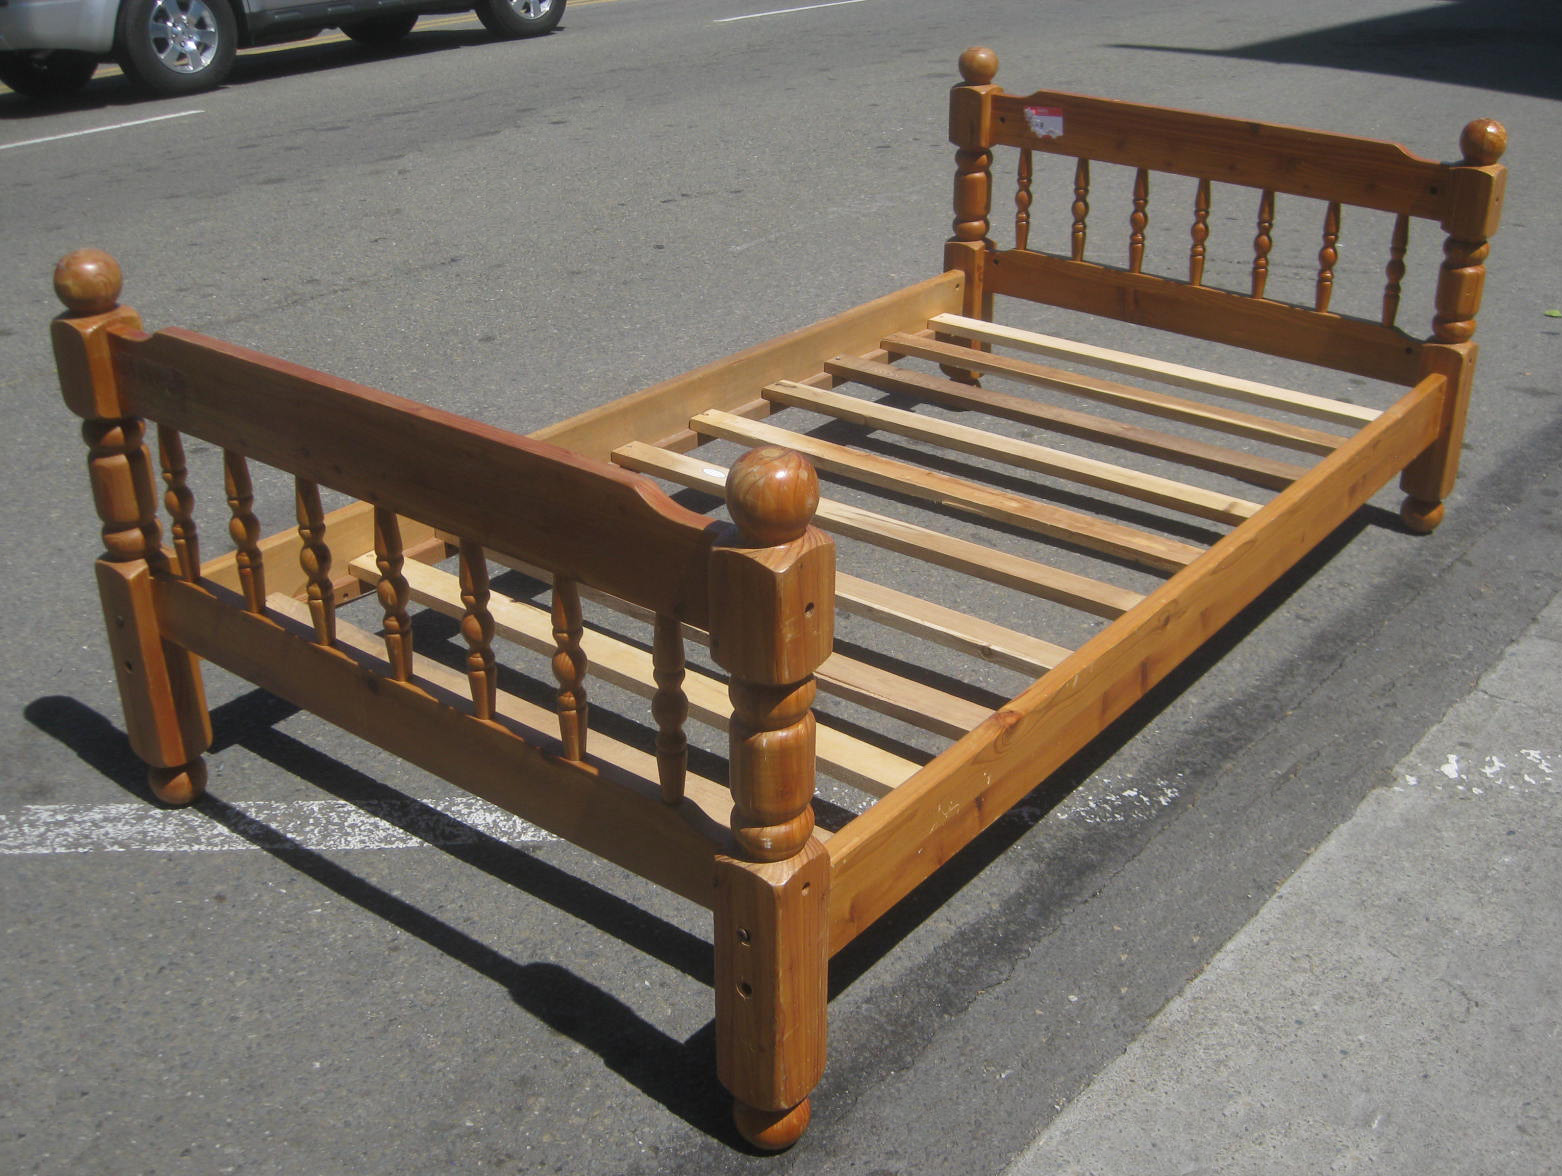 UHURU FURNITURE amp; COLLECTIBLES: SOLD  Twin Bed Frame  $35